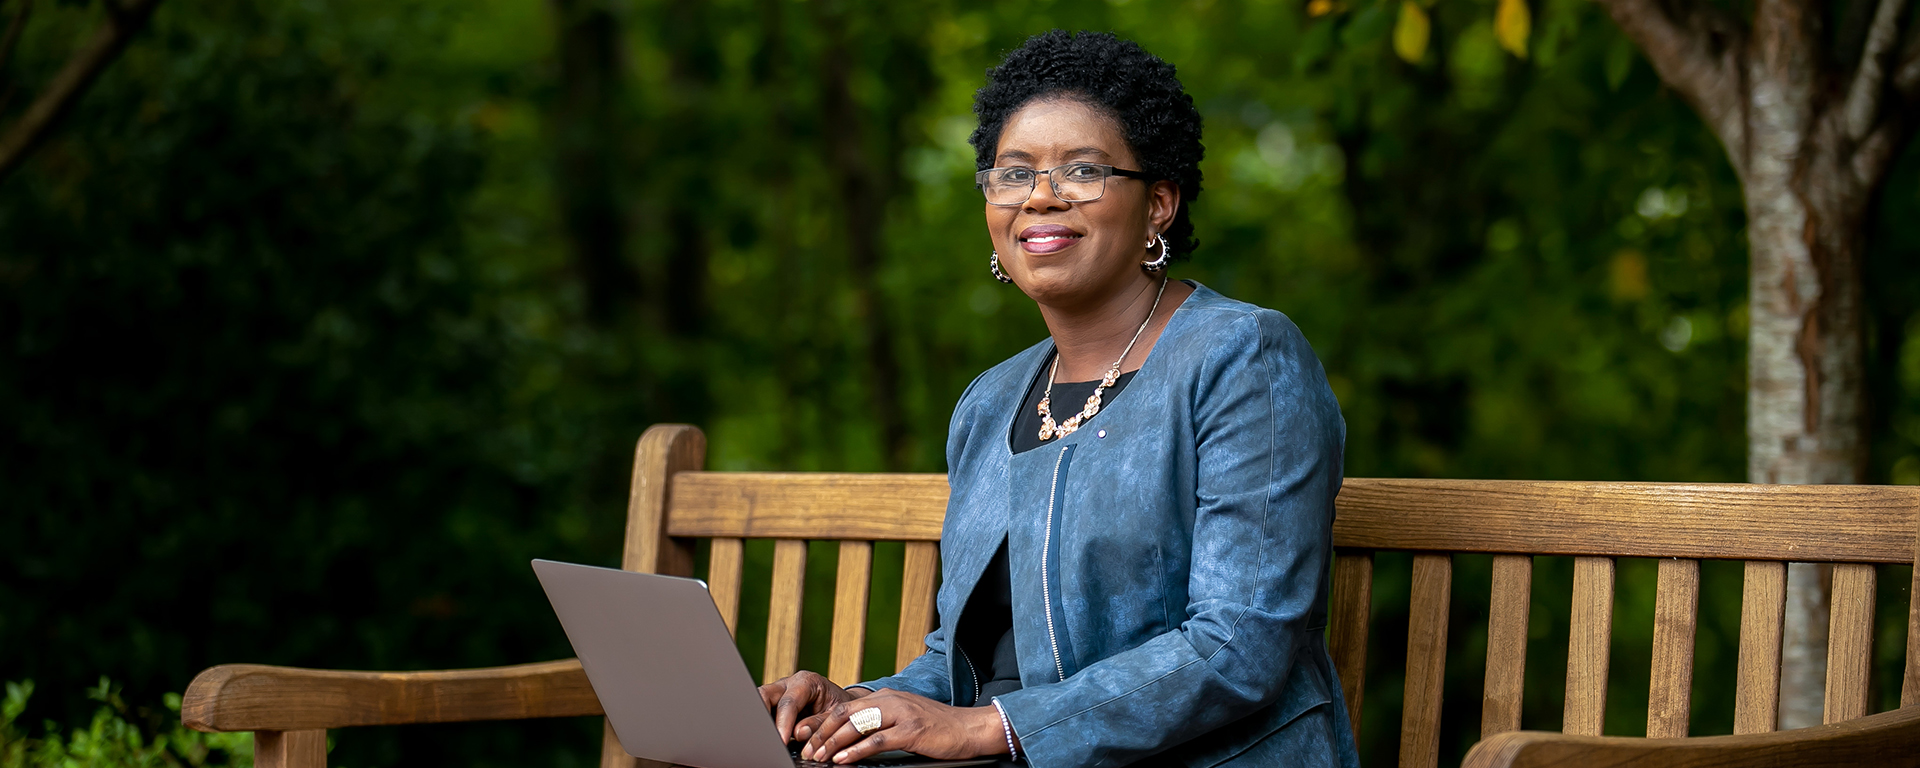 Capital One leader Maureen sits on a bench outside with her laptop